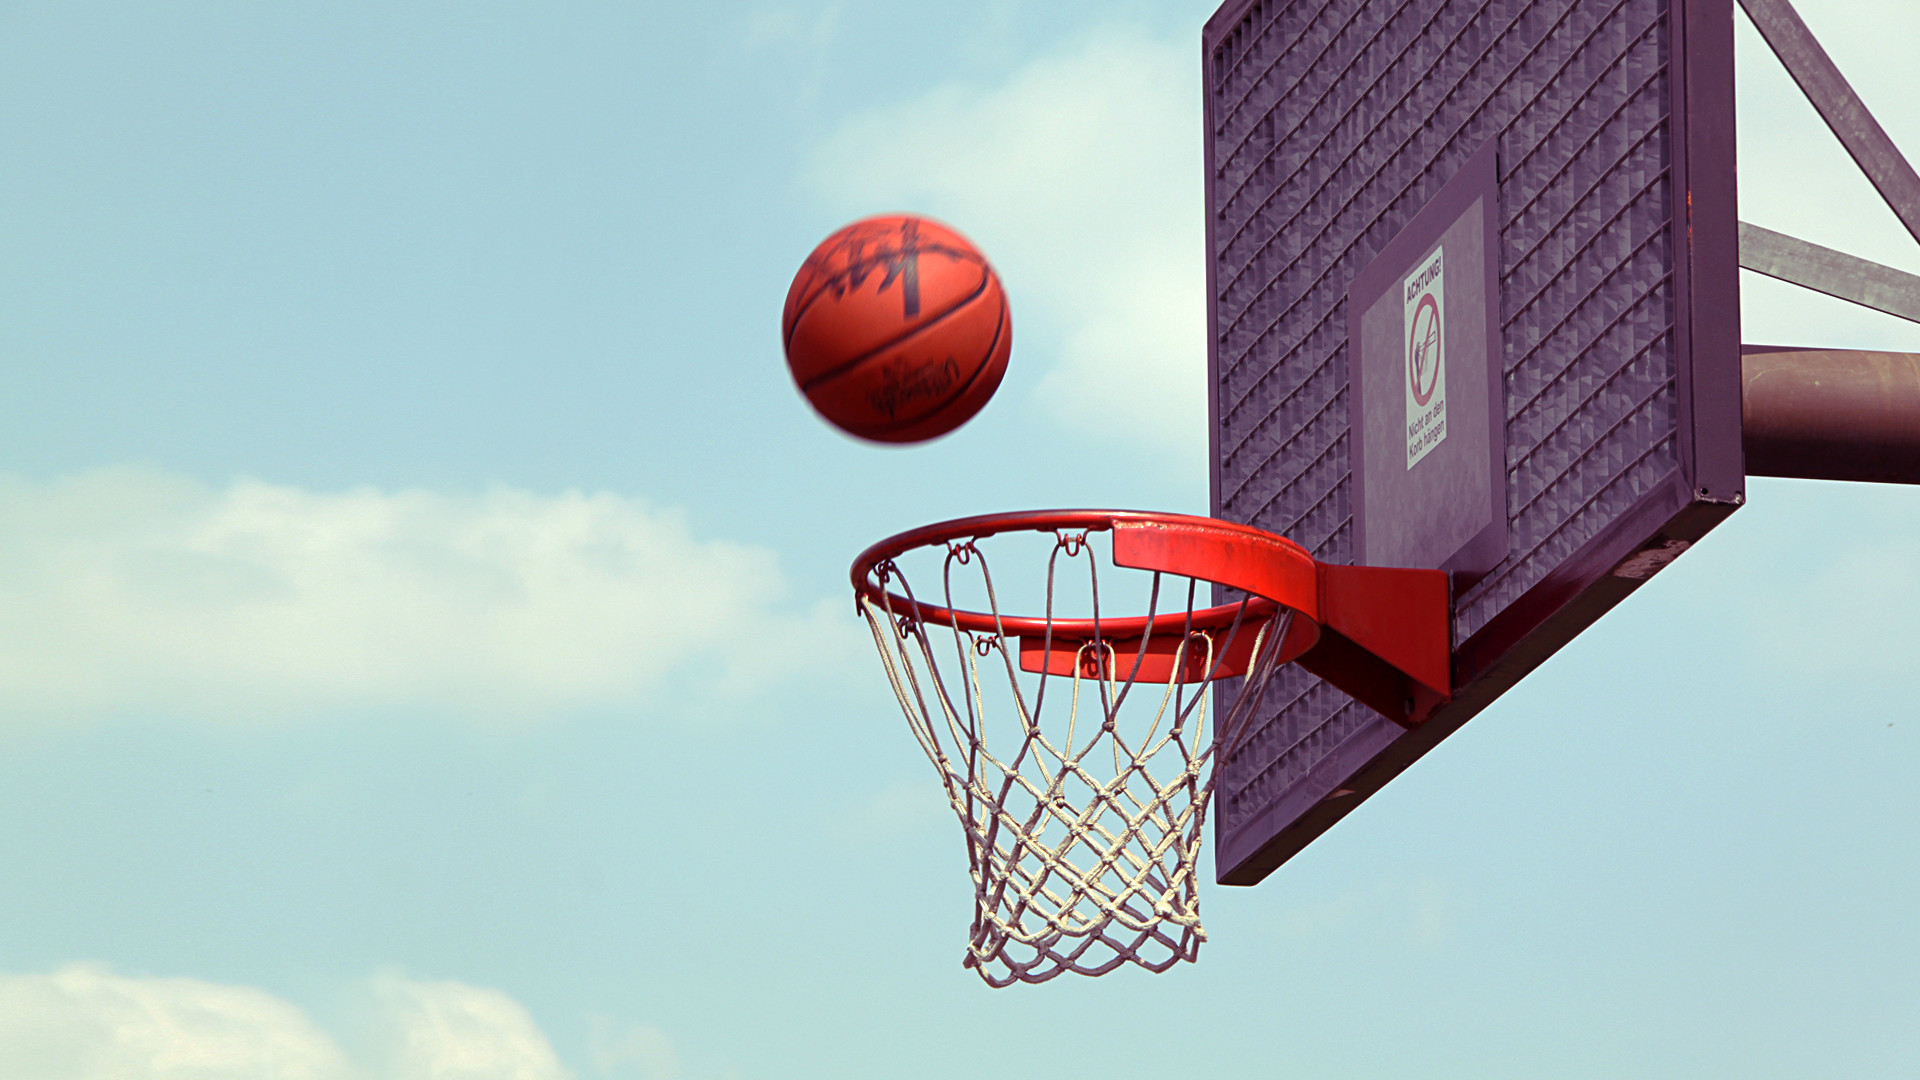 1920x1080 Basketball Wallpaper For Android